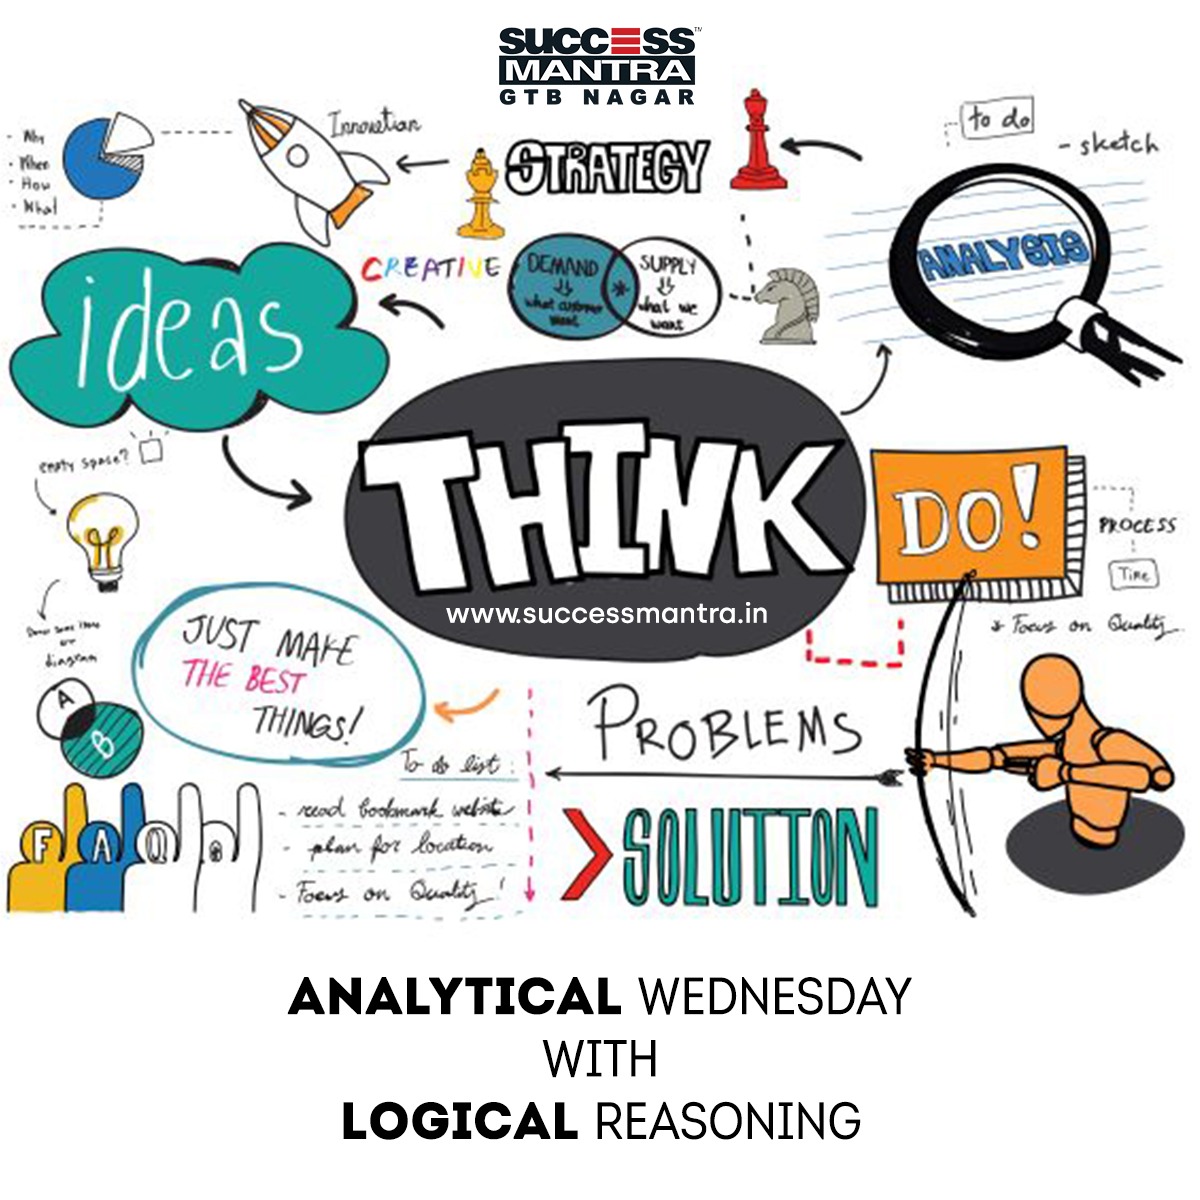 Questions on Logical Reasoning SMLRQ022